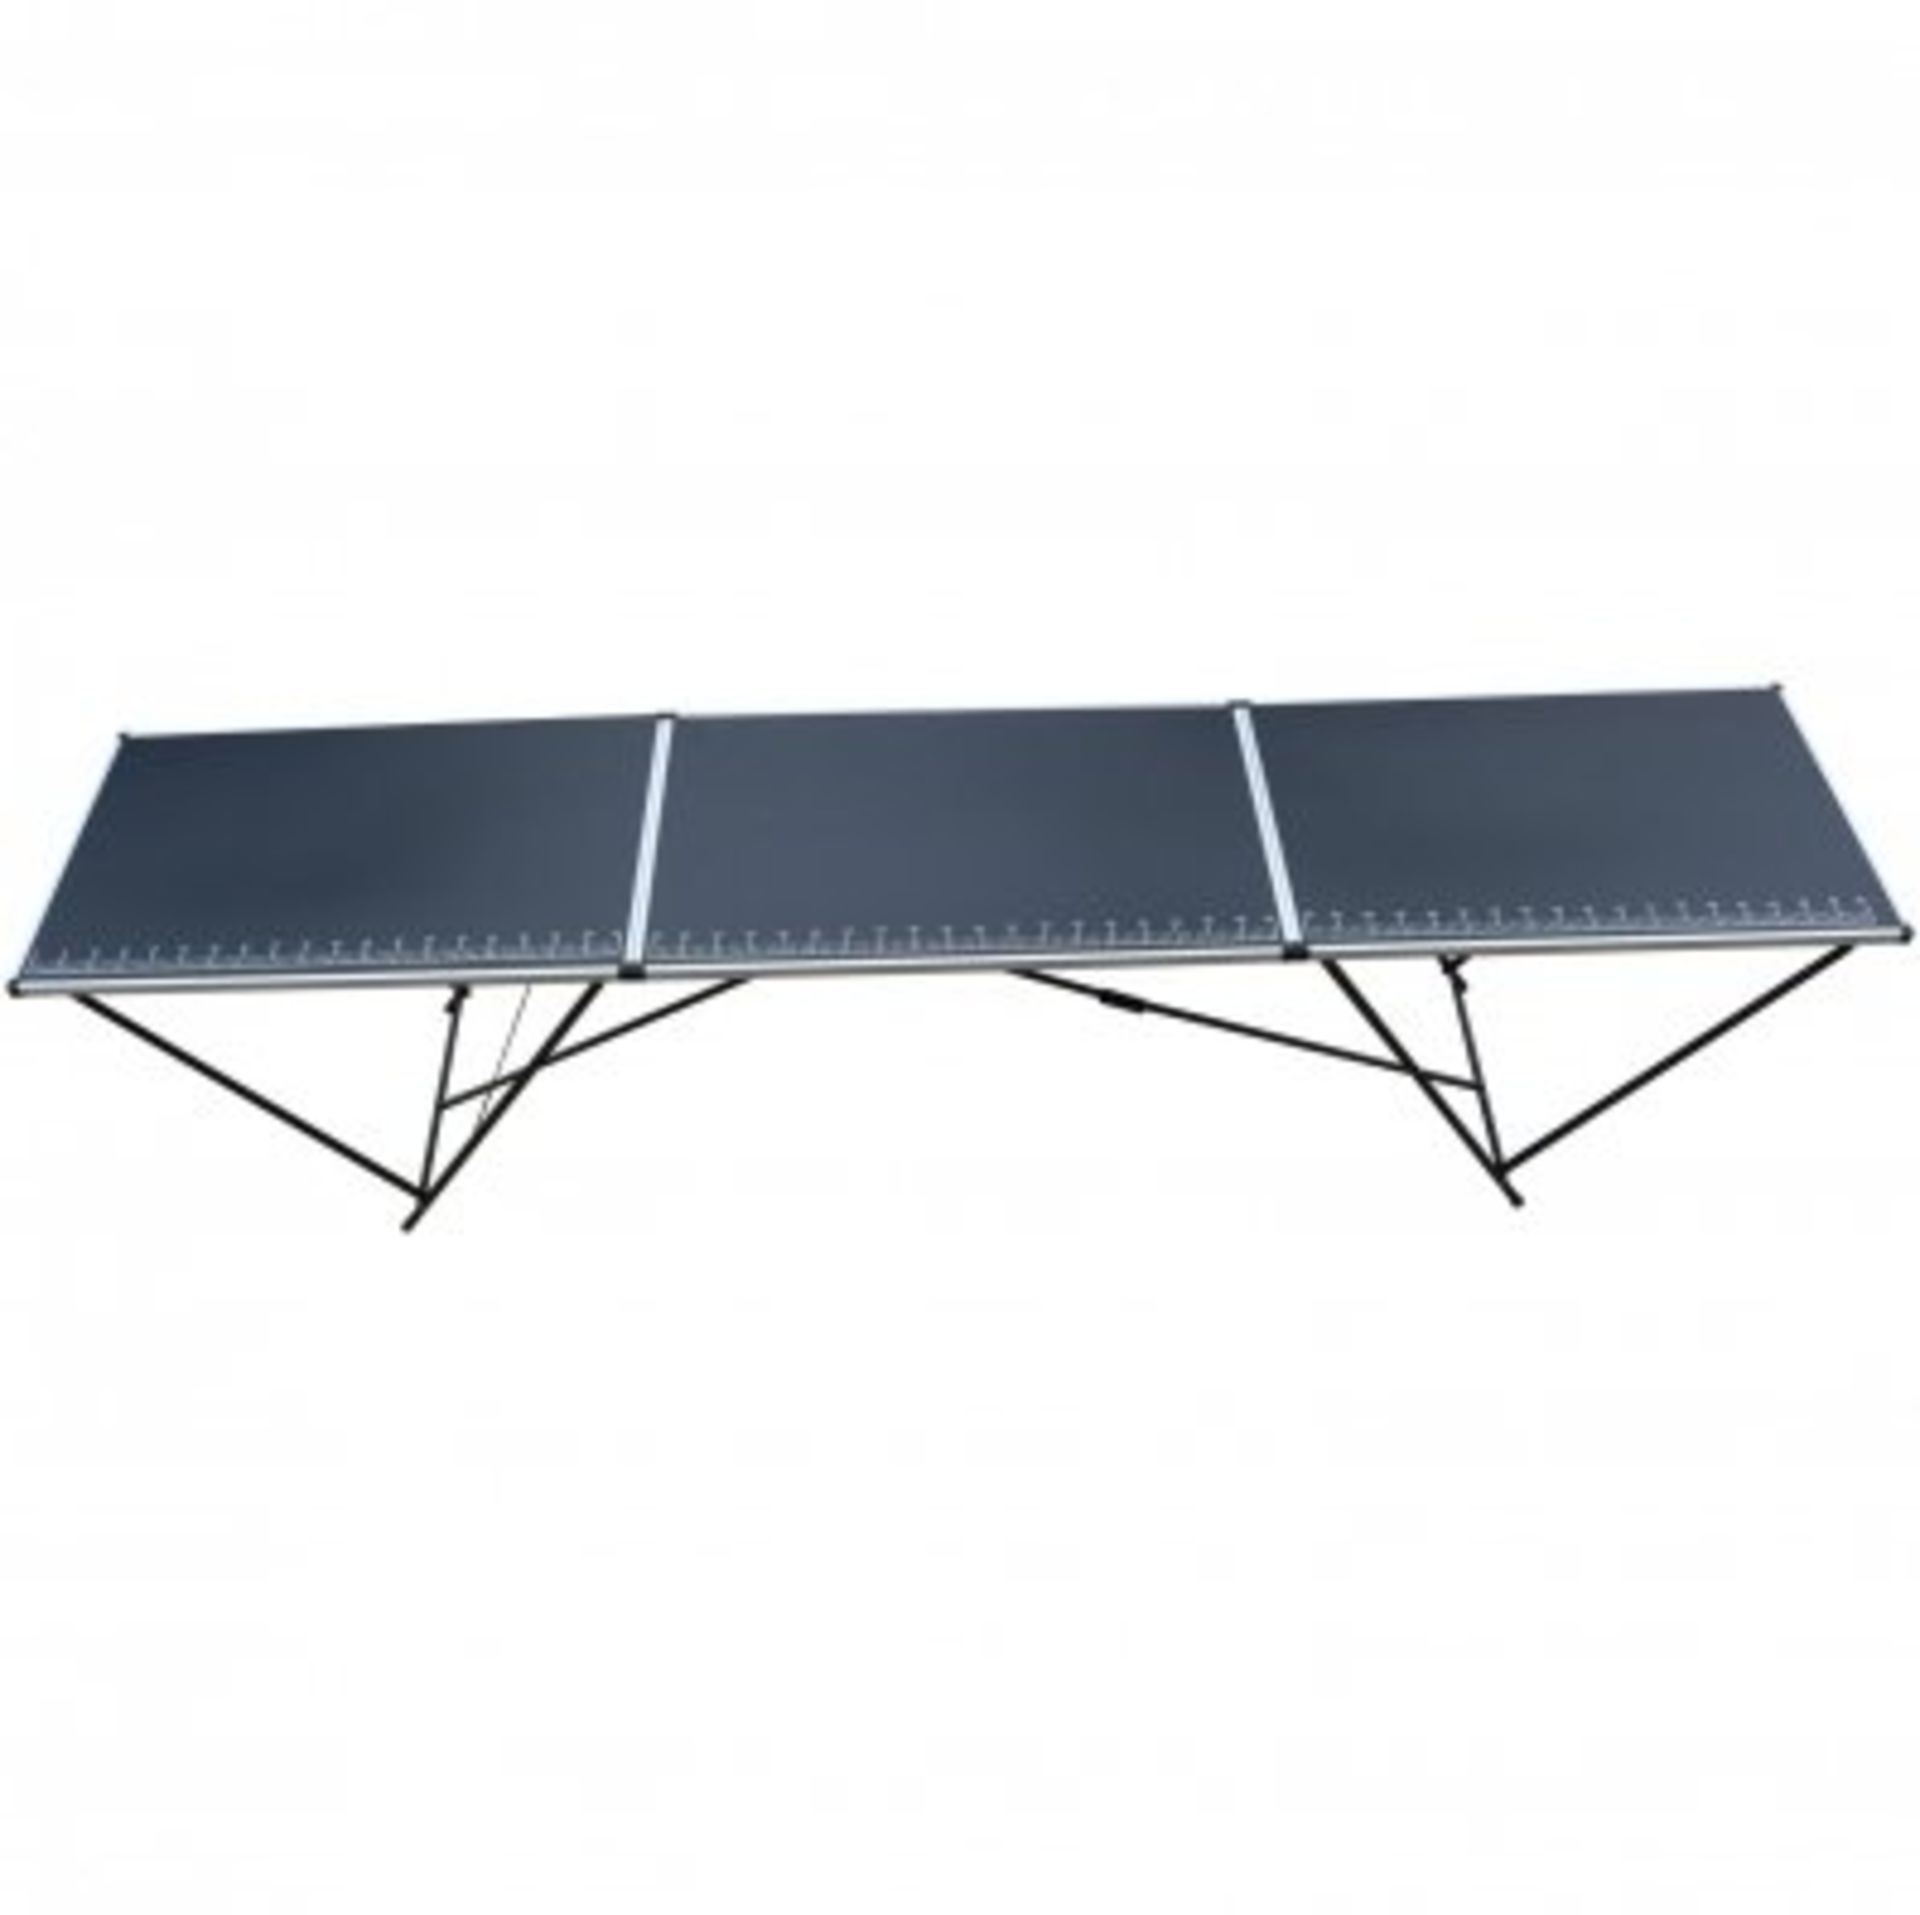 (PP34) 3m Aluminium Folding Wallpaper Pasting Decorating Table The pasting table is ideal fo...